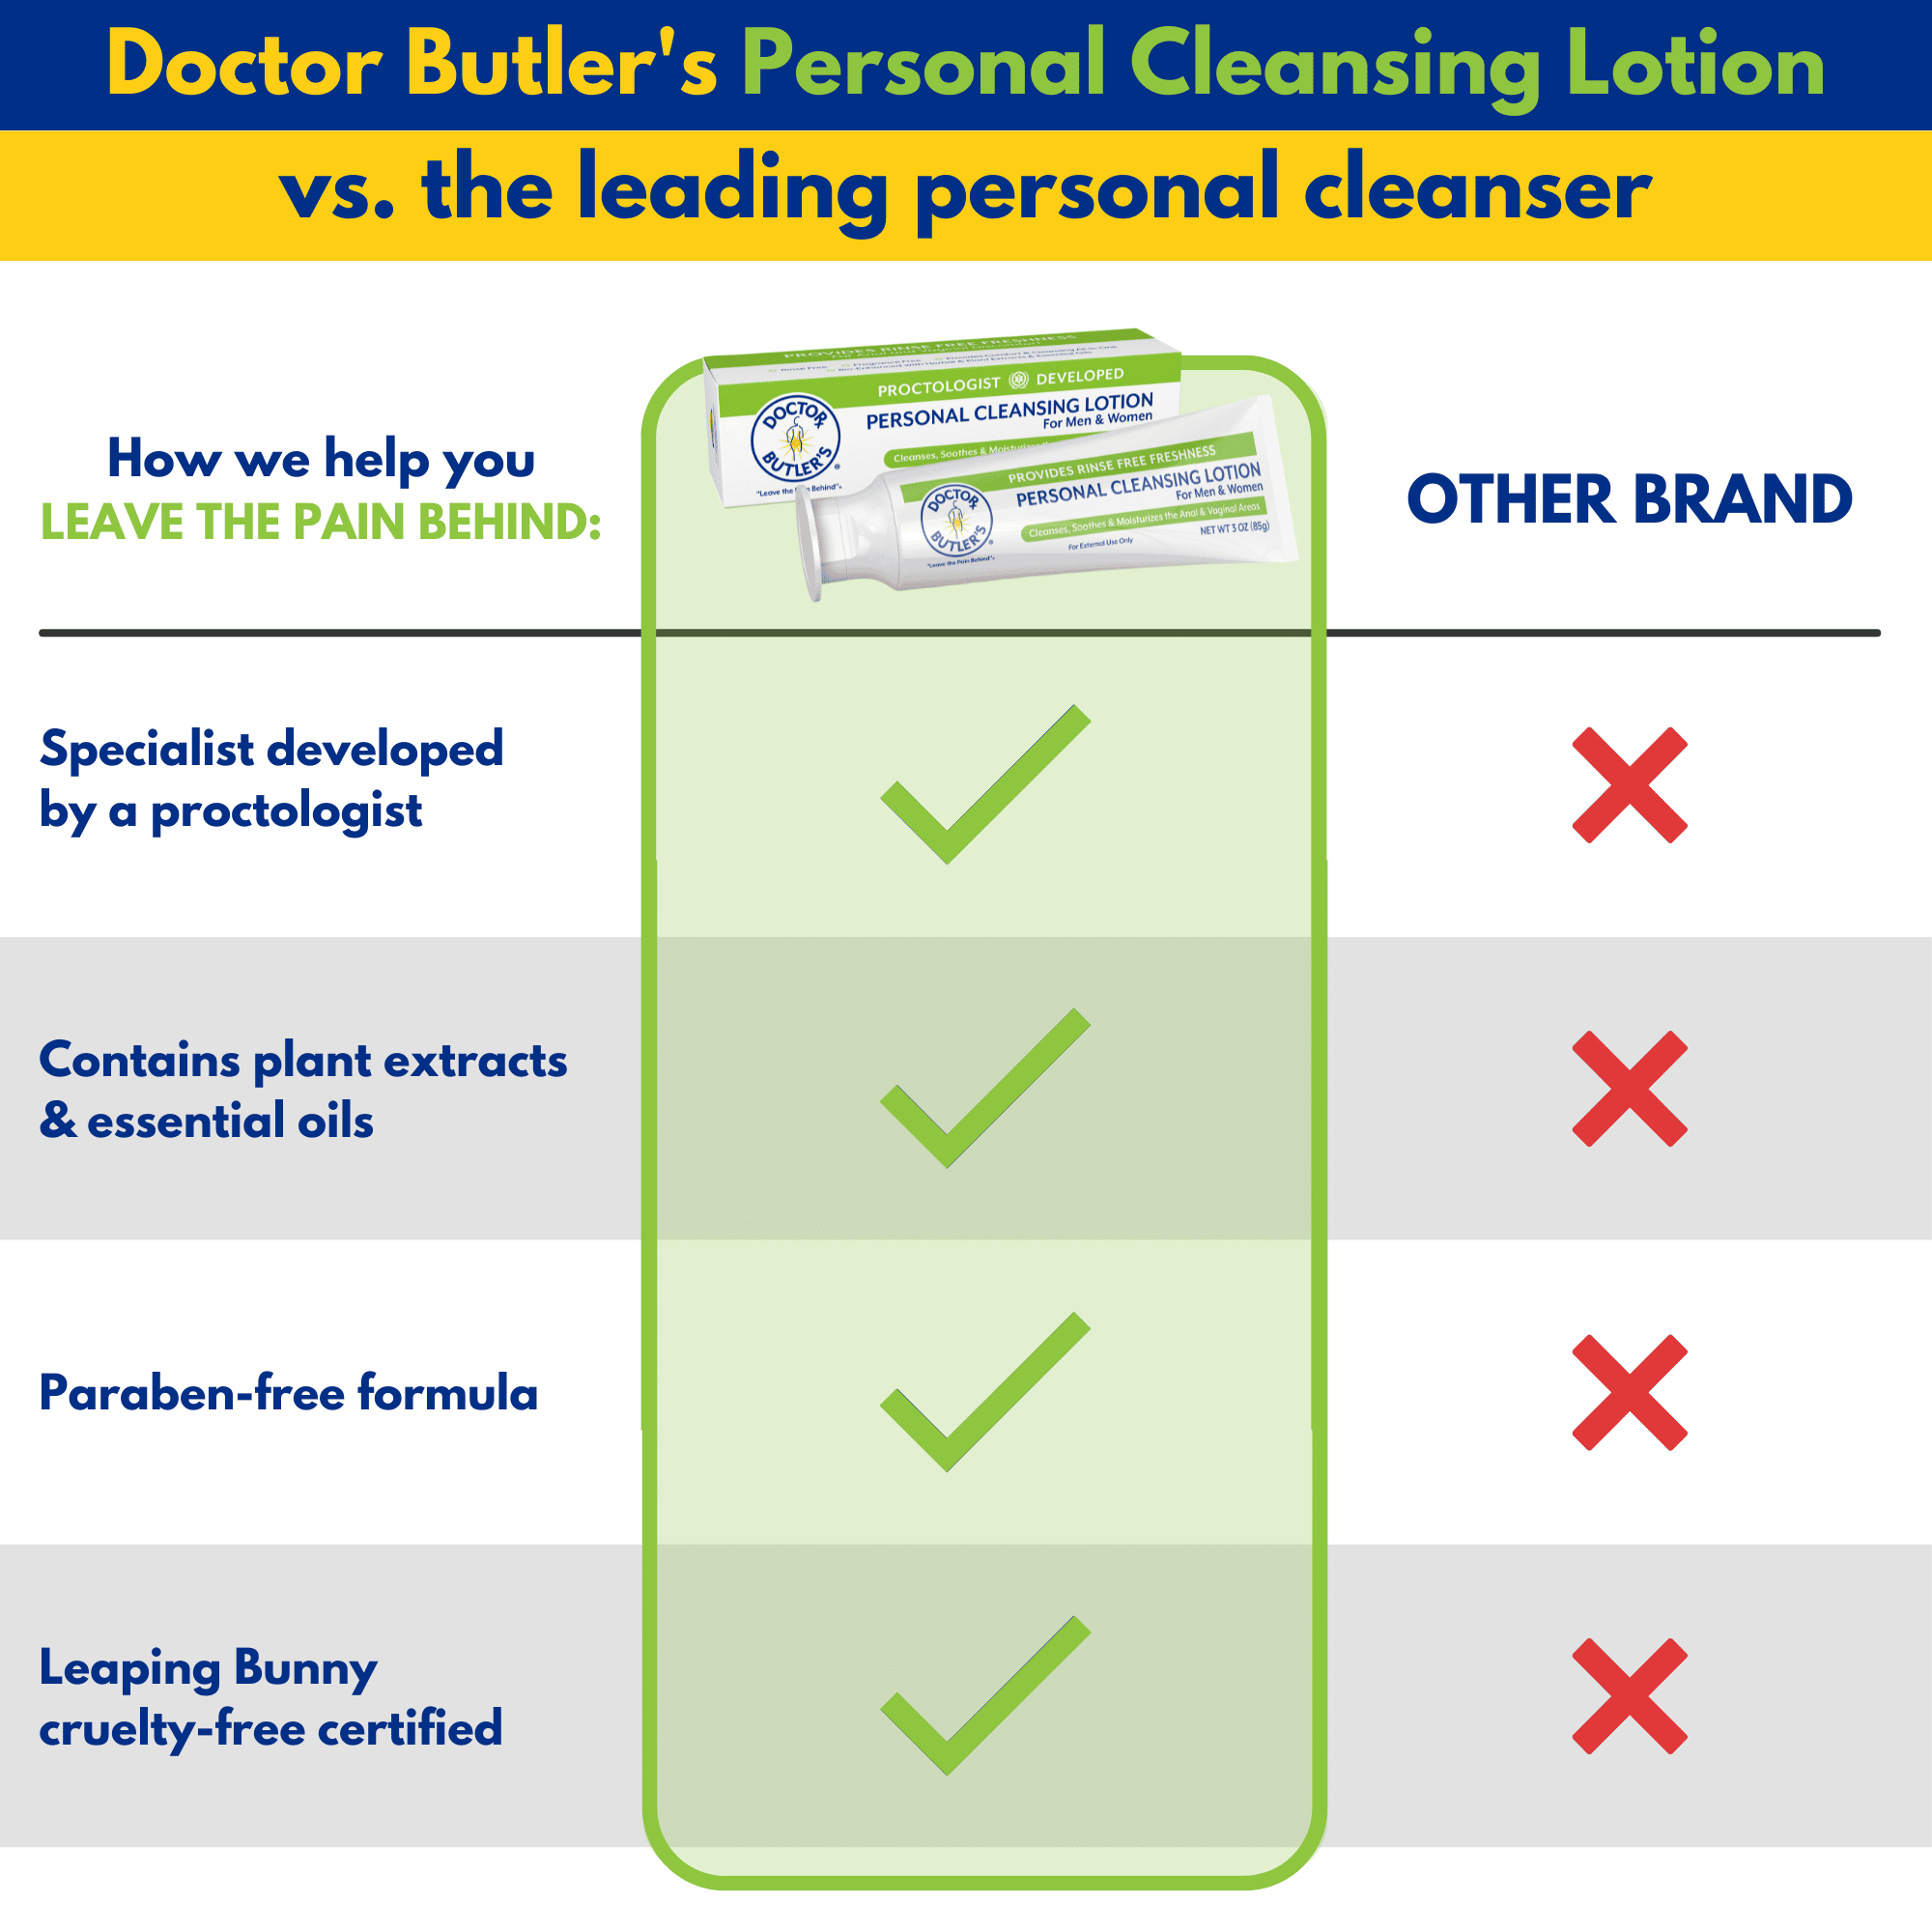 Personal Cleansing Lotion by Doctor Butler's